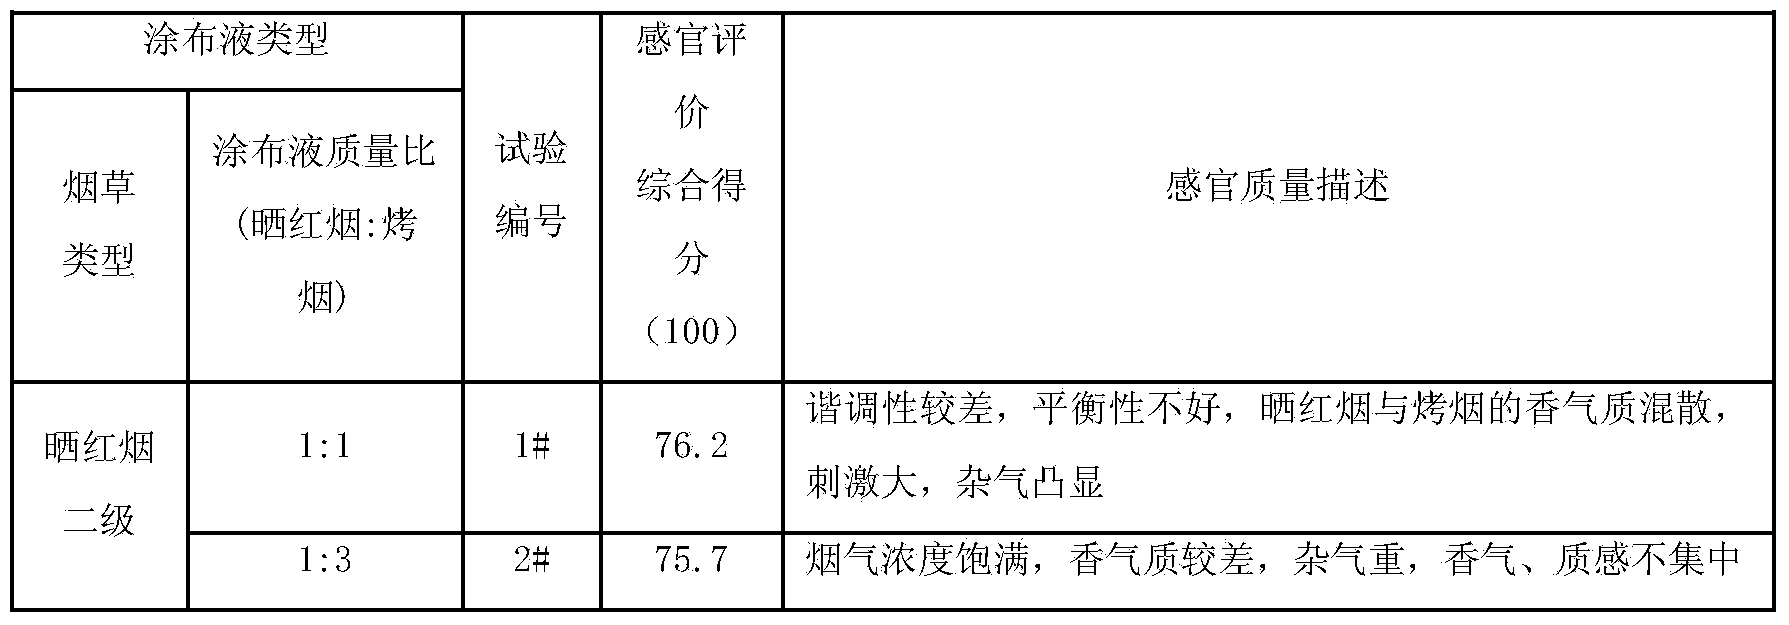 Method for preparing paper-making-method reconstituted tobacco with sun-cured red tobacco style characteristic